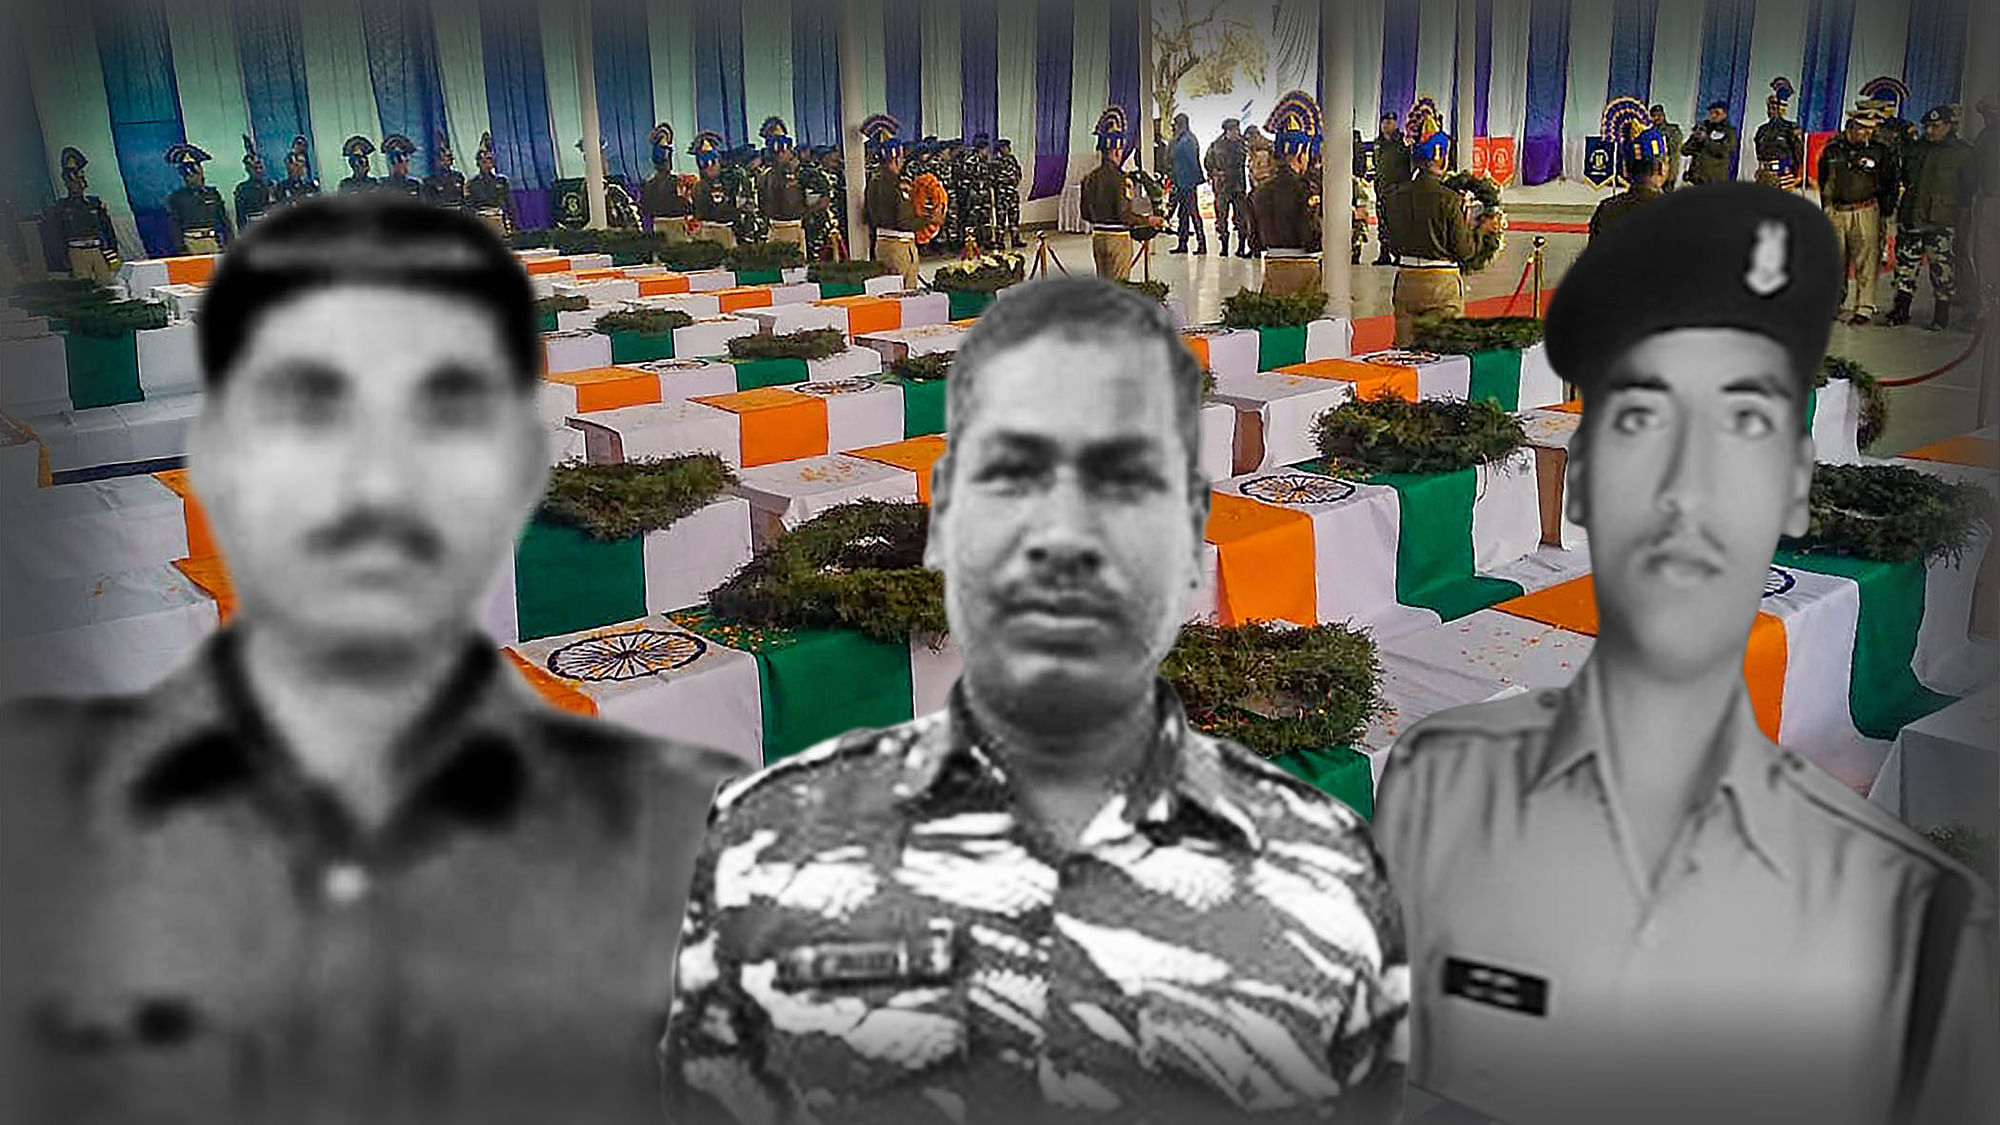 On 14 February 2019, a suicide bomber attacked a convoy of CRPF personnel which rocked Kashmir’s Pulwama and sent shockwaves through the country. The Quint dwells deeper into how lives of the martyrs’ families have shaped in a year.